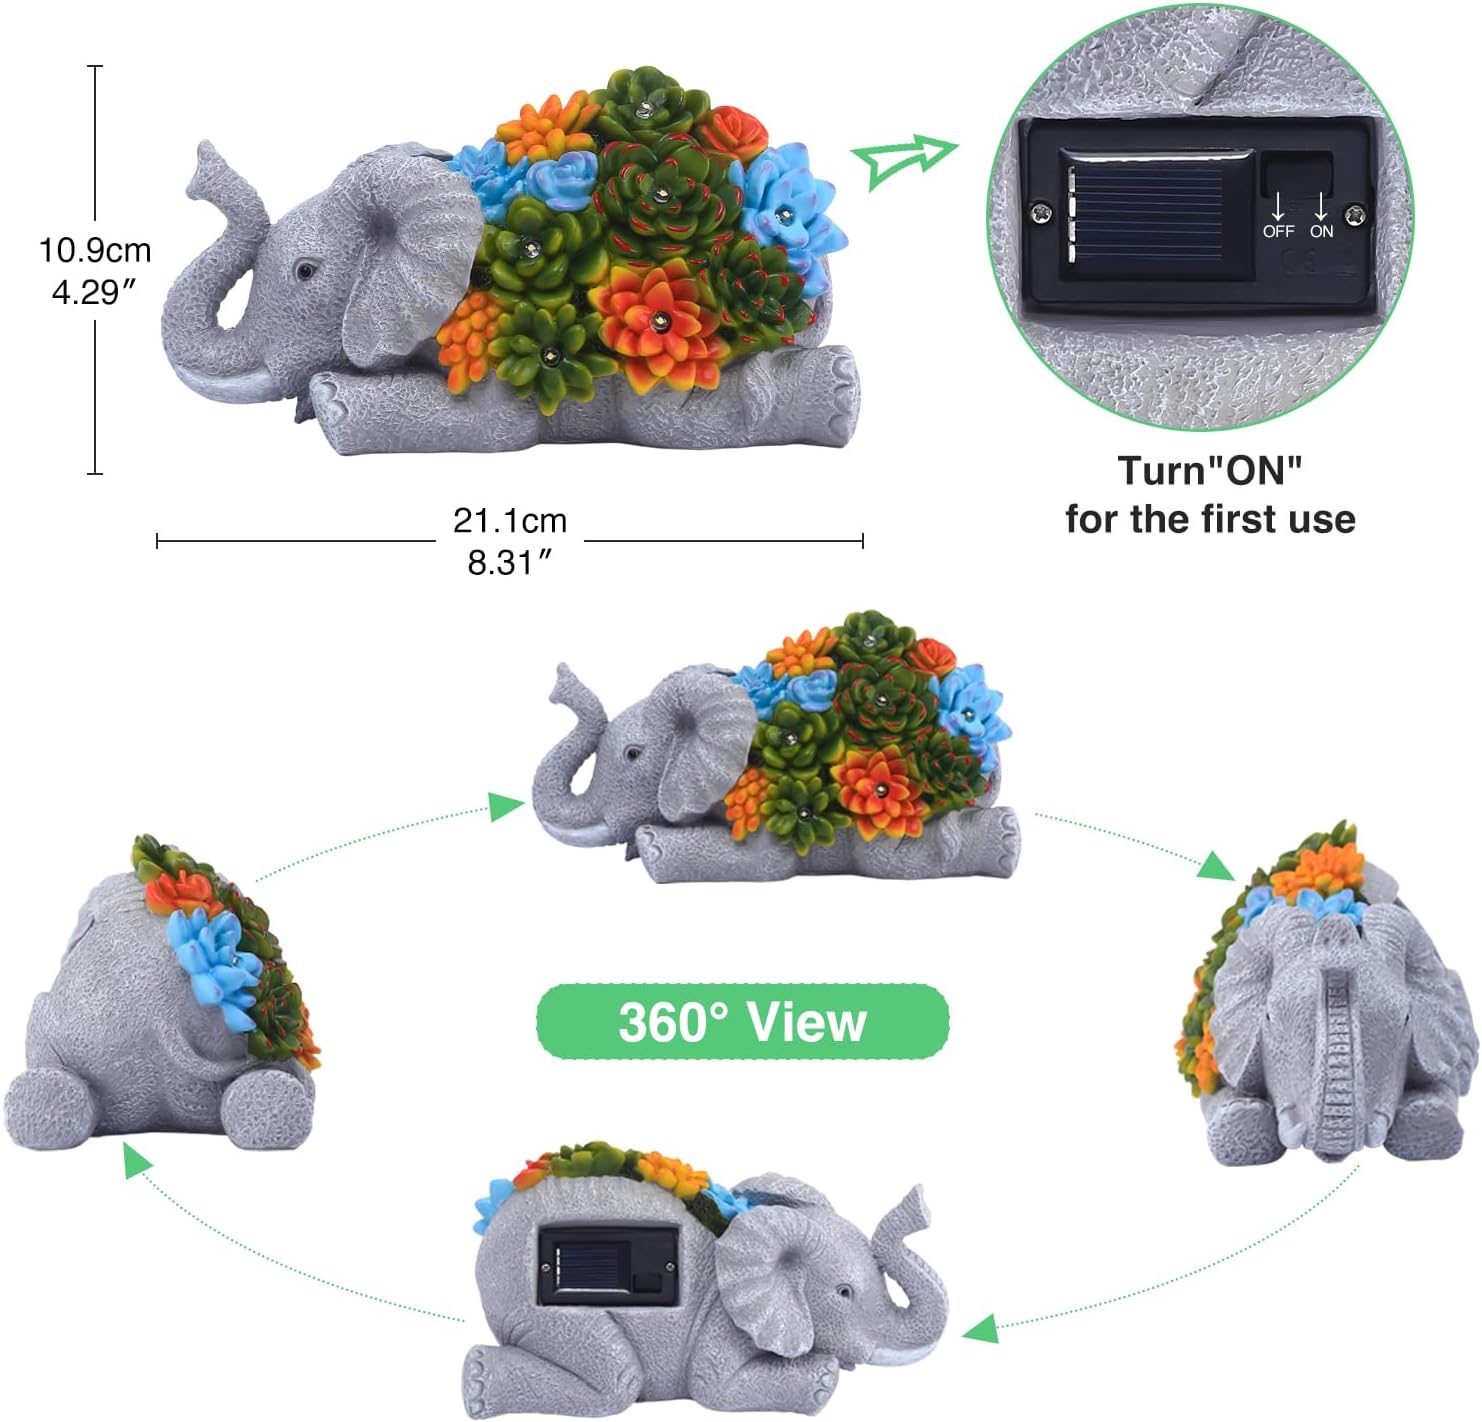 Elephant Statue Solar Garden Ornaments Outdoor Decor Waterproof Resin Elephant Figurines with Succulent 6 LED Solar Lights decoration for Home Yard Patio Lawn Elephant gifts for Women/Mum/Christmas 1